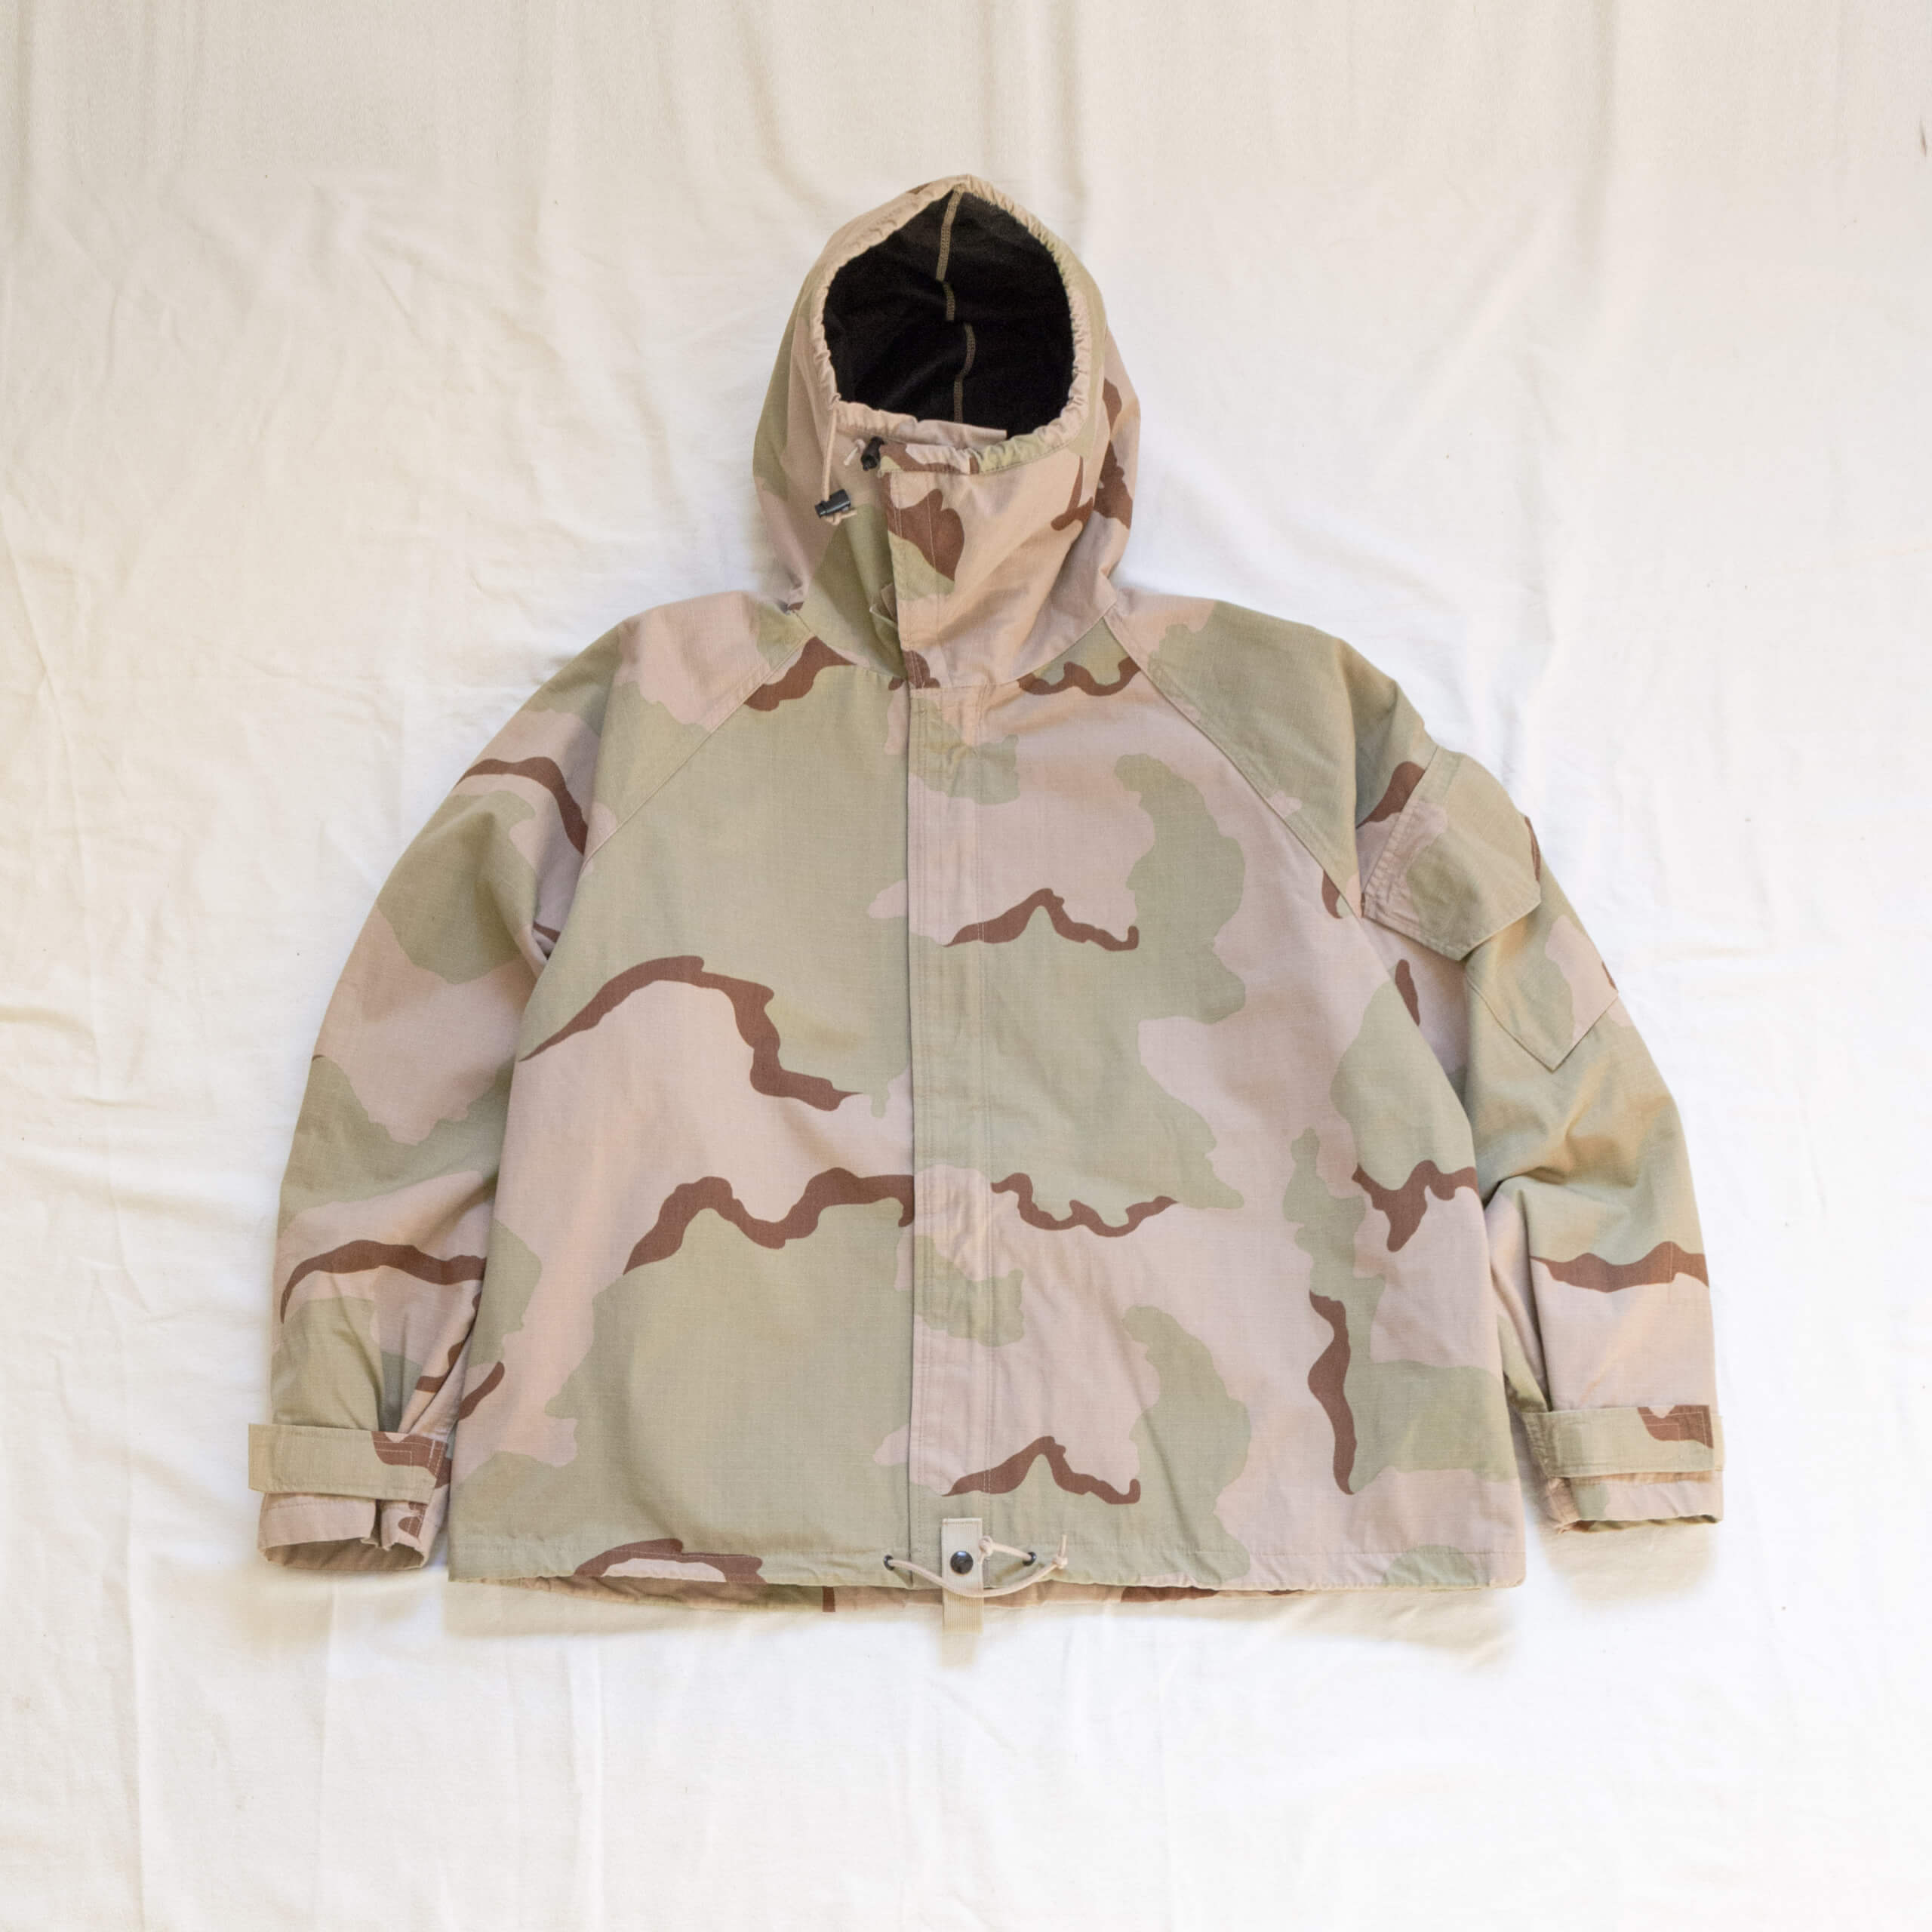 us-military-chemical-nfr-coat-desert-3color-camo_p2